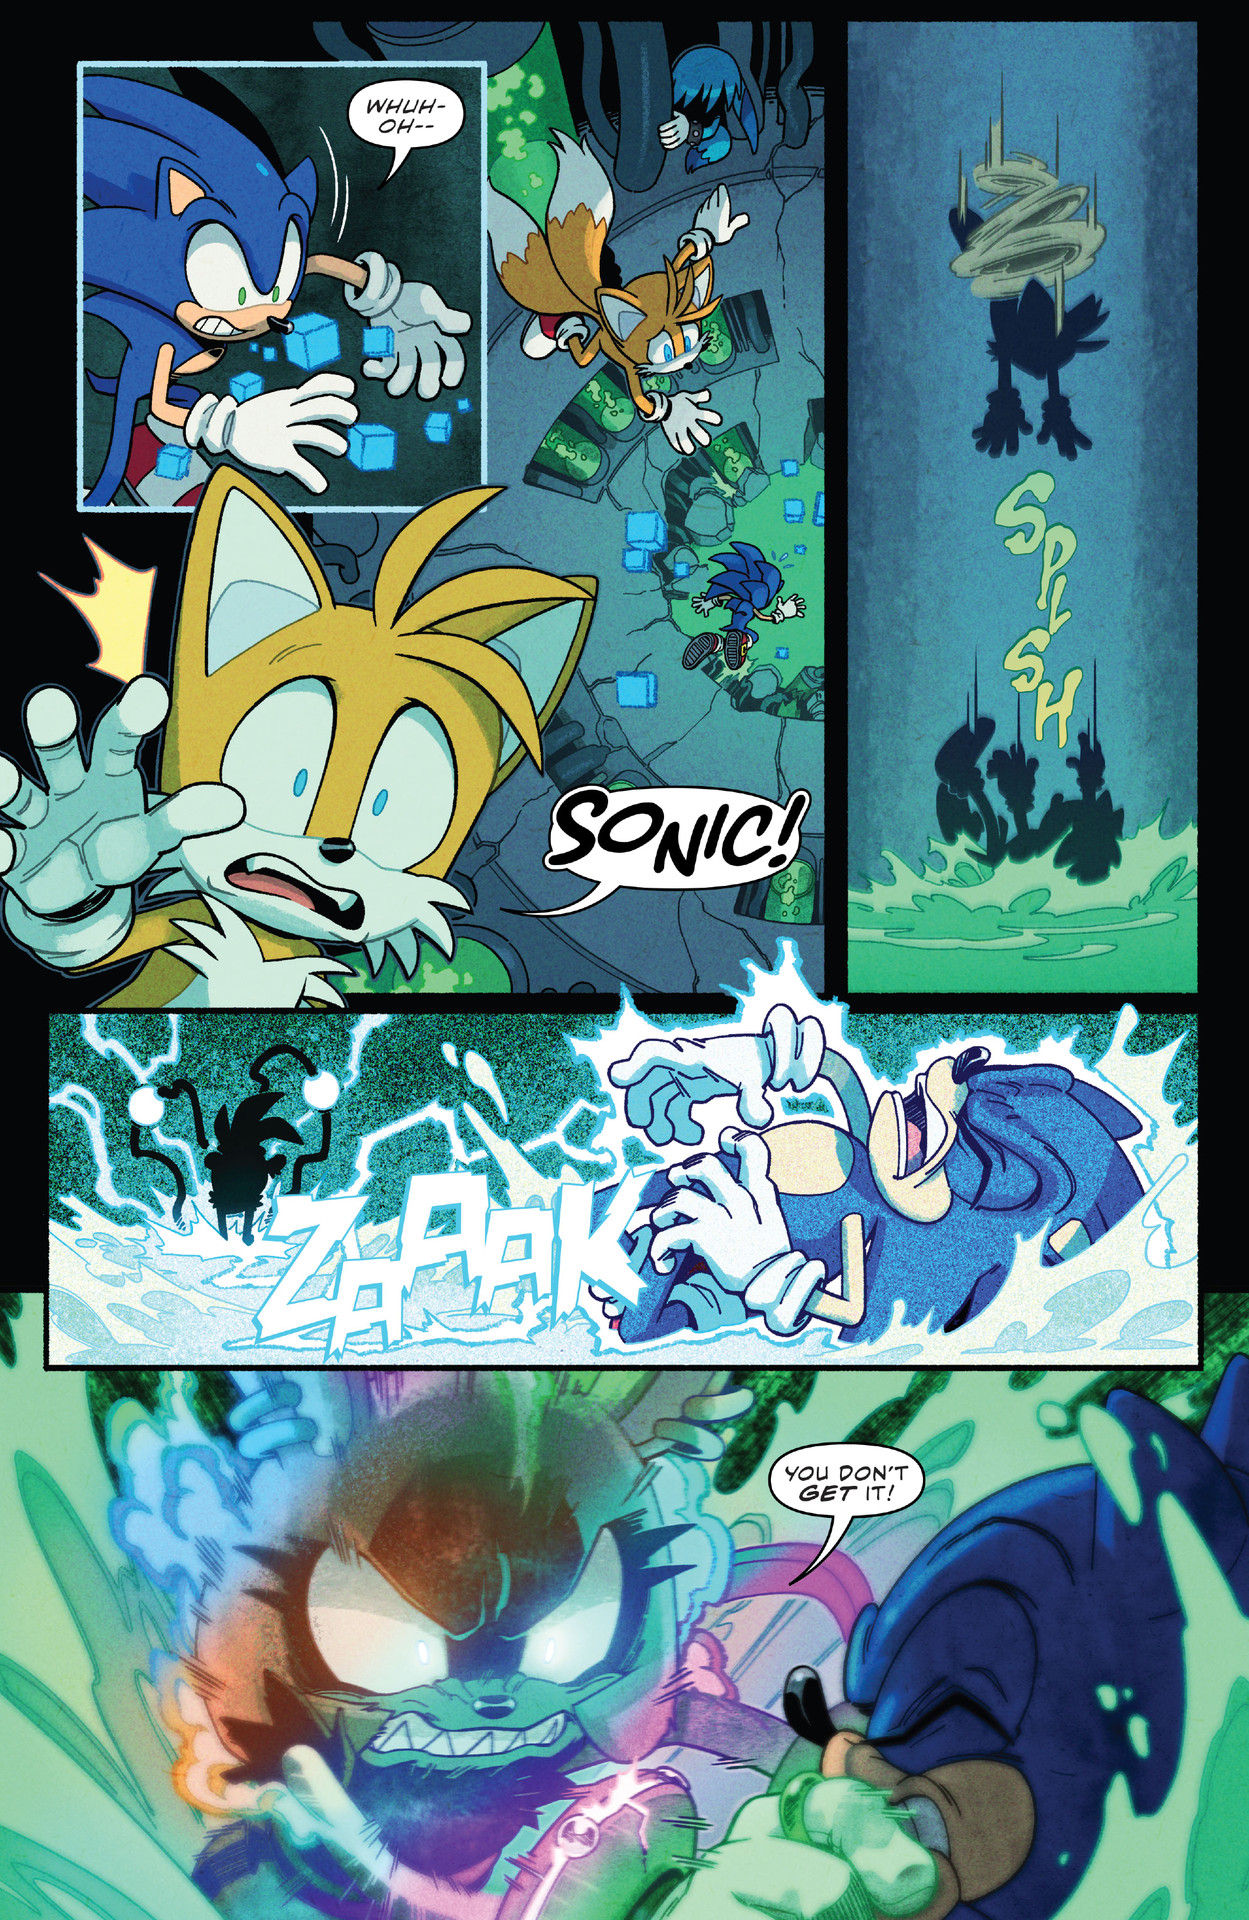 Finished issue 56 of IDW Sonic today, really liked this arc, so